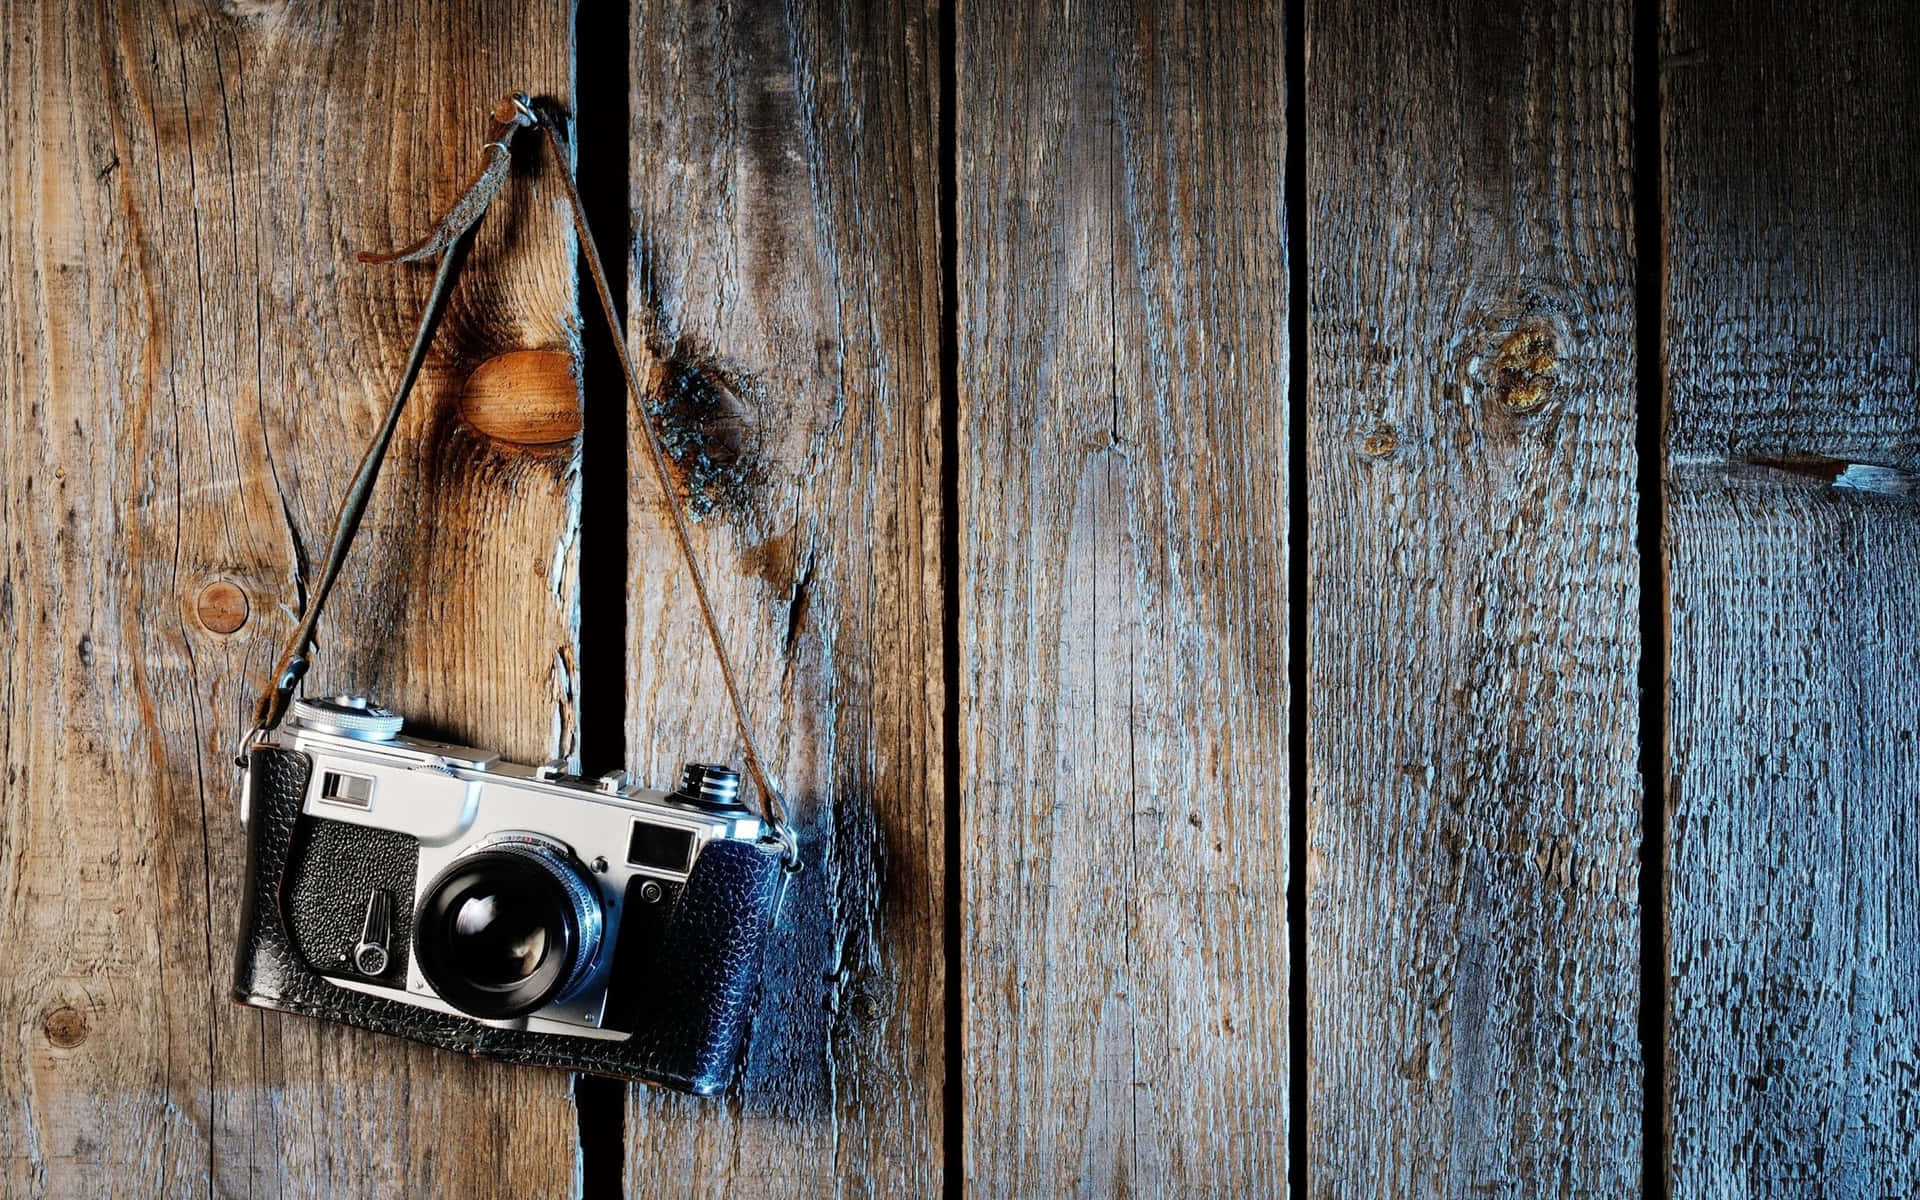 Caption: Vintage Camera Hanging From A Wooden Beam Background